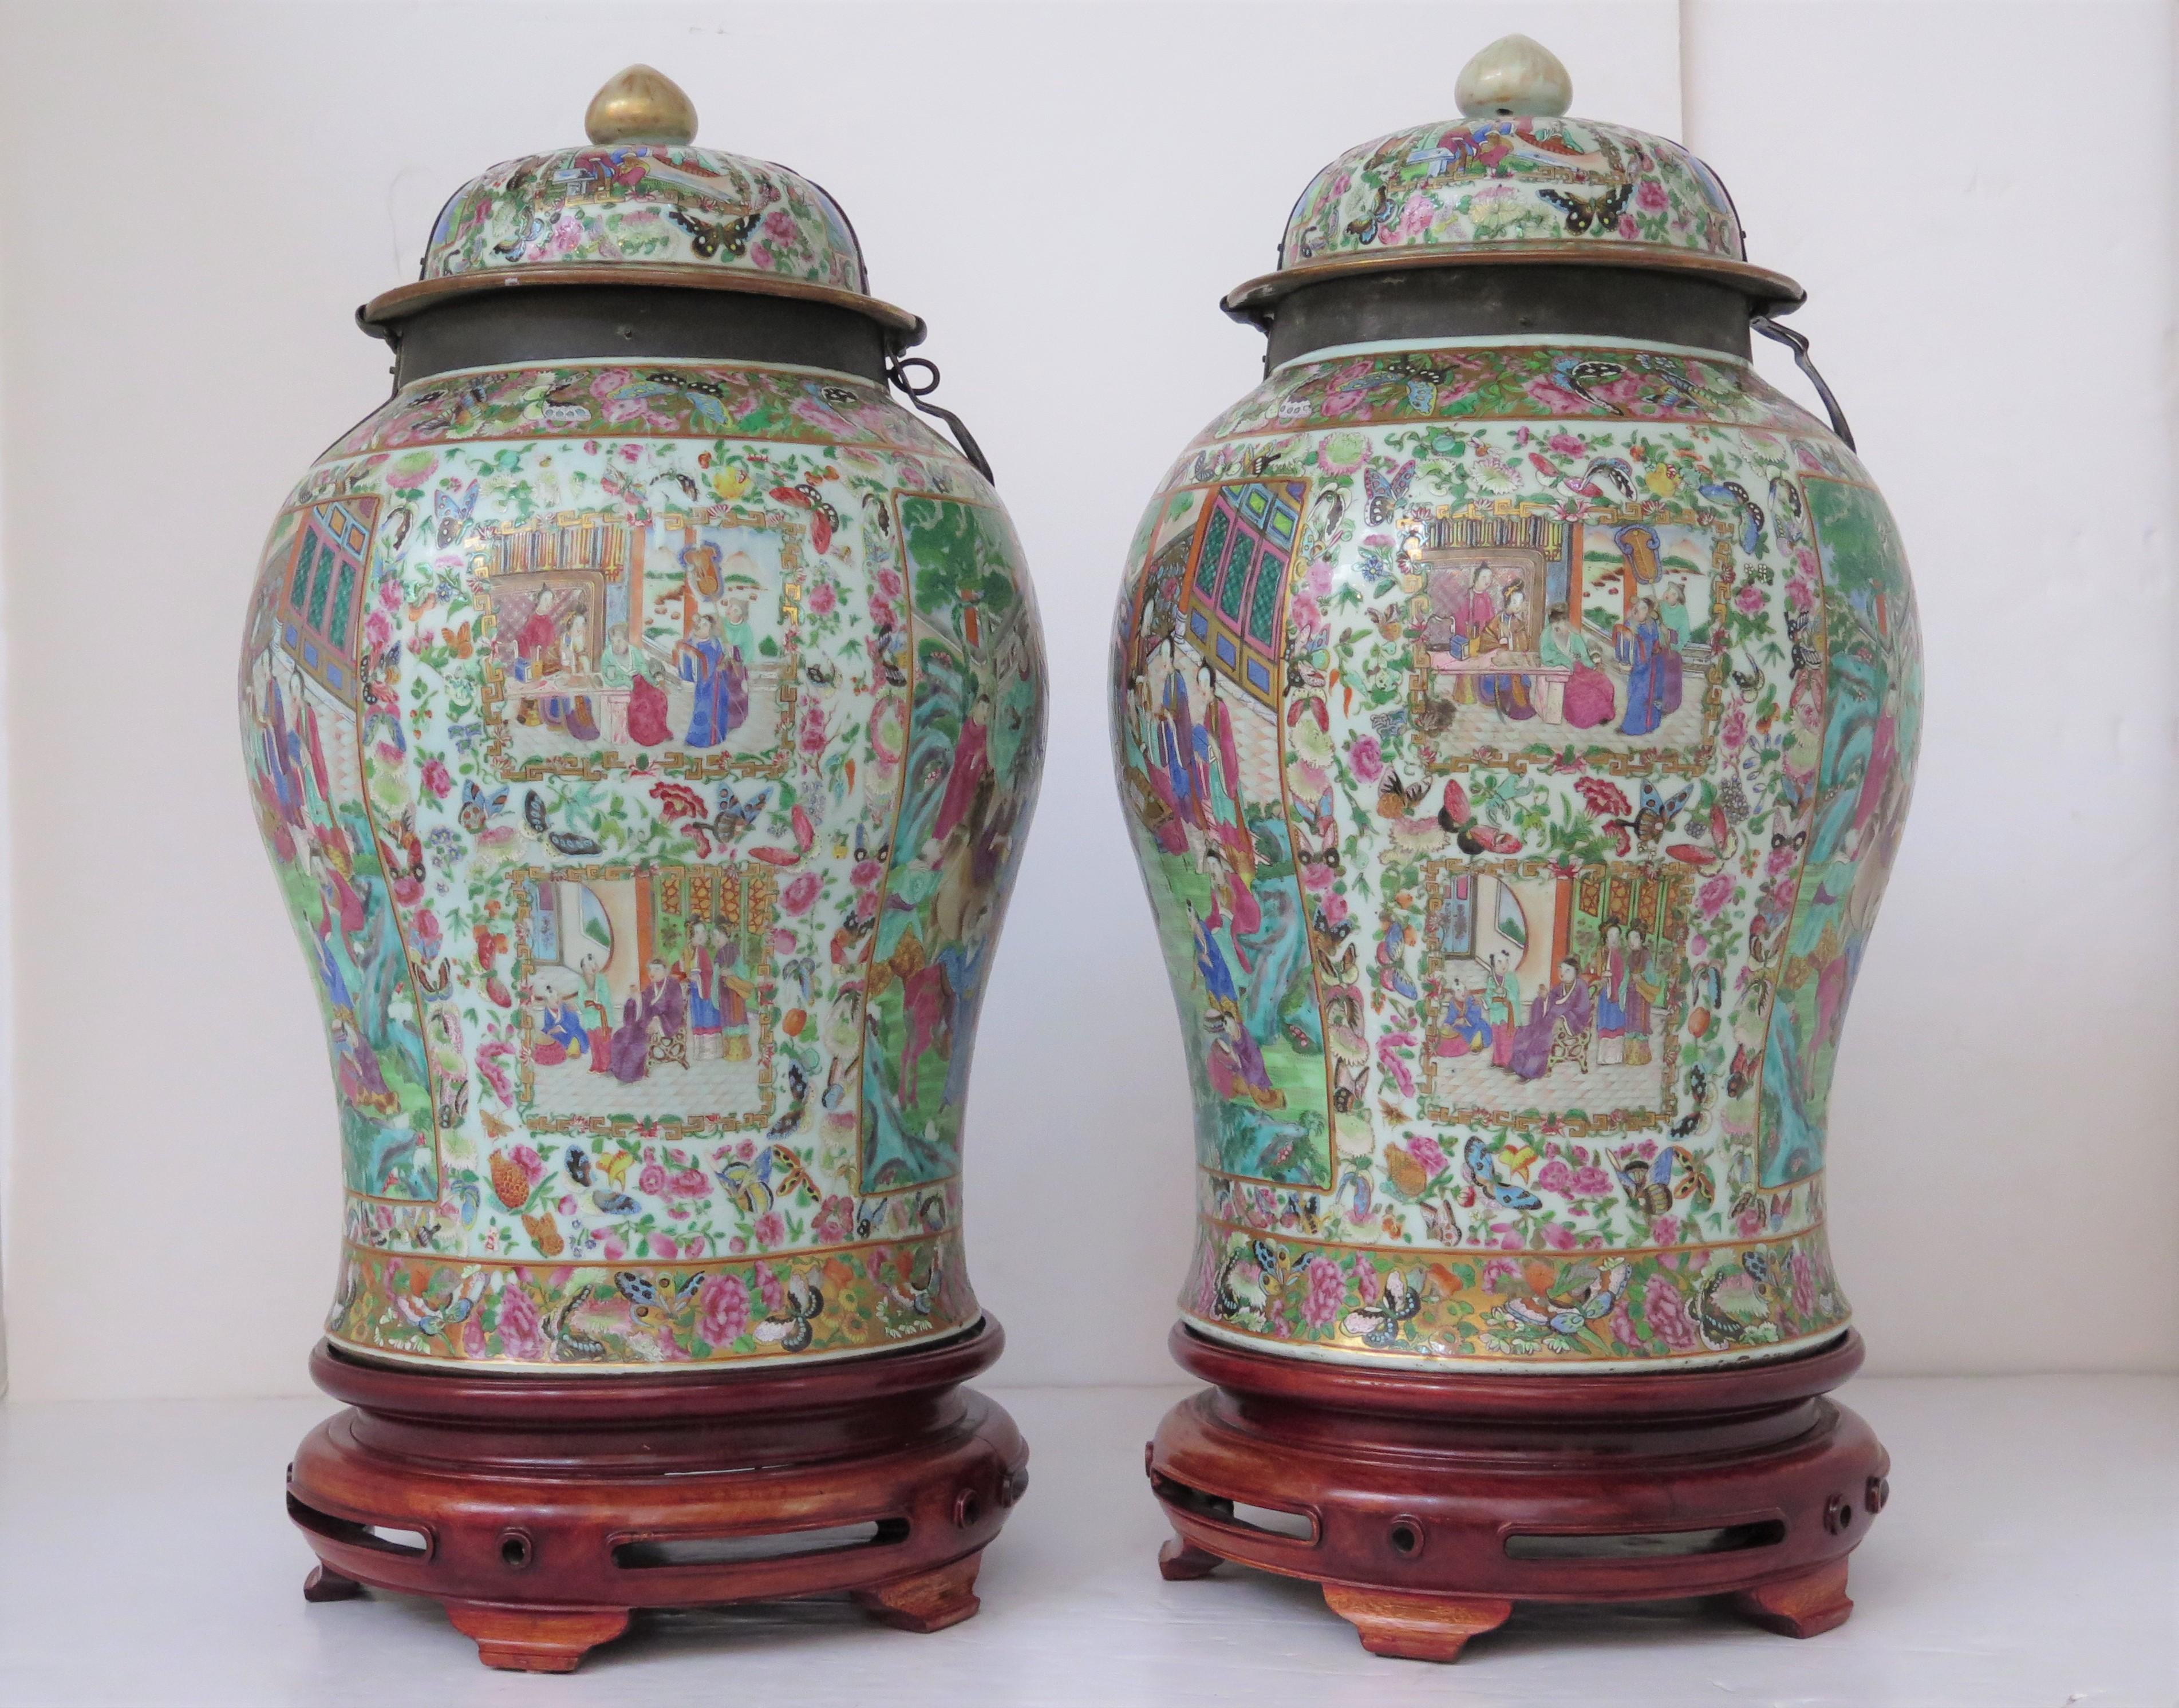 A pair of late 18th-early 19th century Chinese beautifully painted famille rose lidded jars. Very impressive with iron straps to secure and lock the lids. Jars are raised on 5